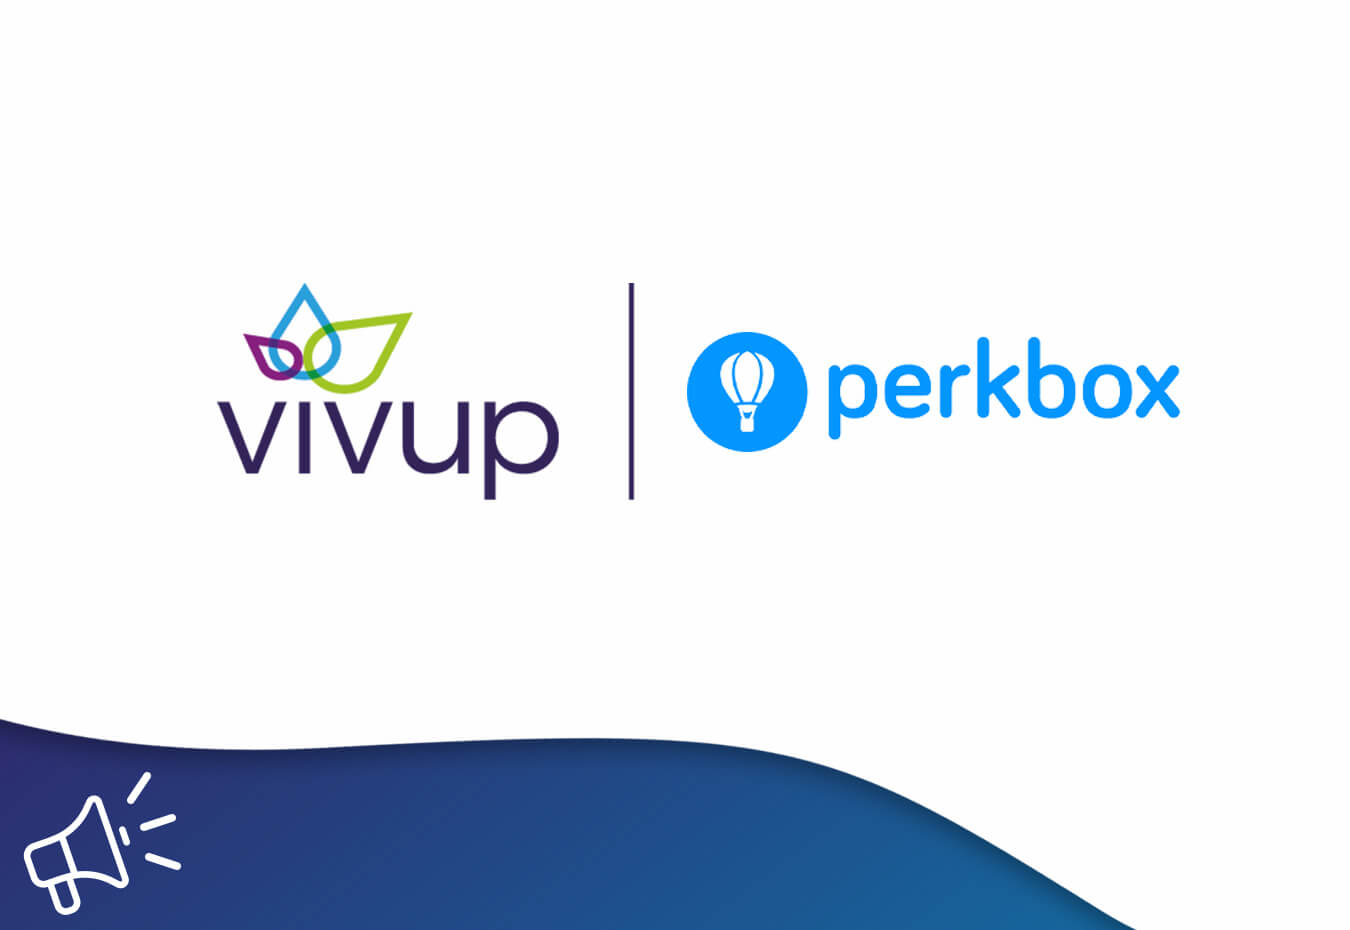 Vivup and Perkbox to Combine